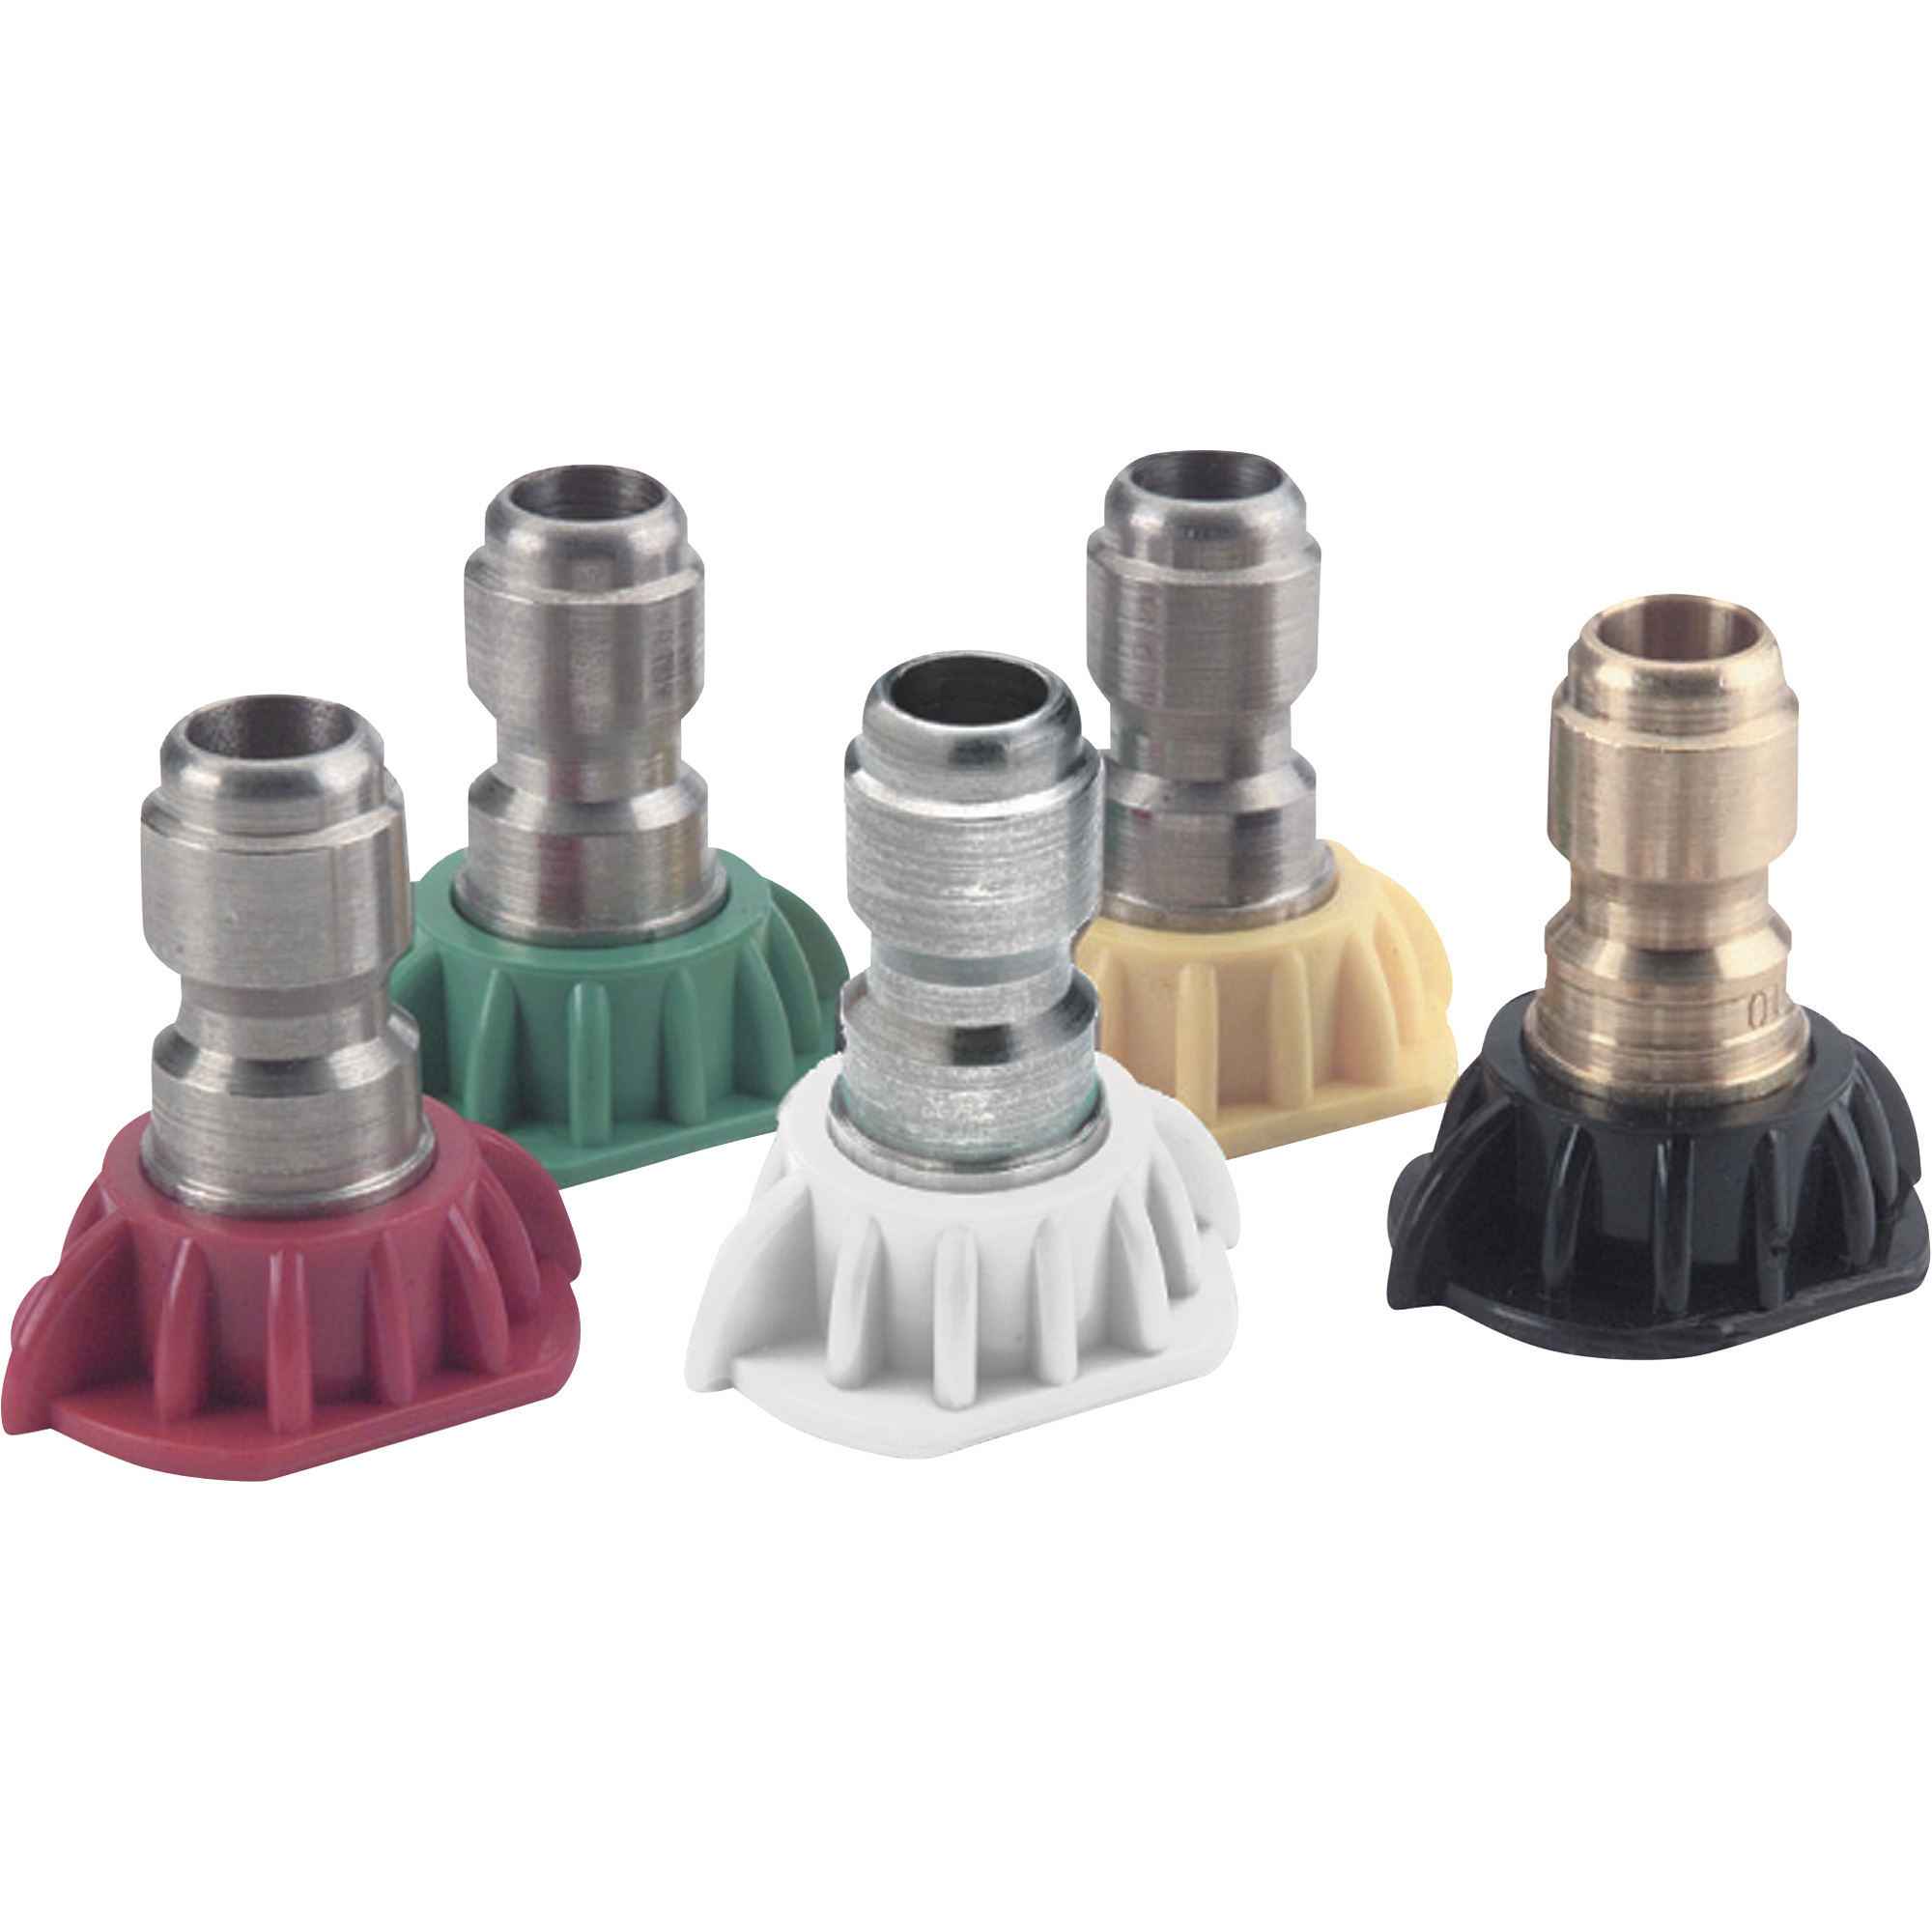 NorthStar 5-Pack Pressure Washer Quick Couple Nozzle Set â 3.0 Size, Model N105082P